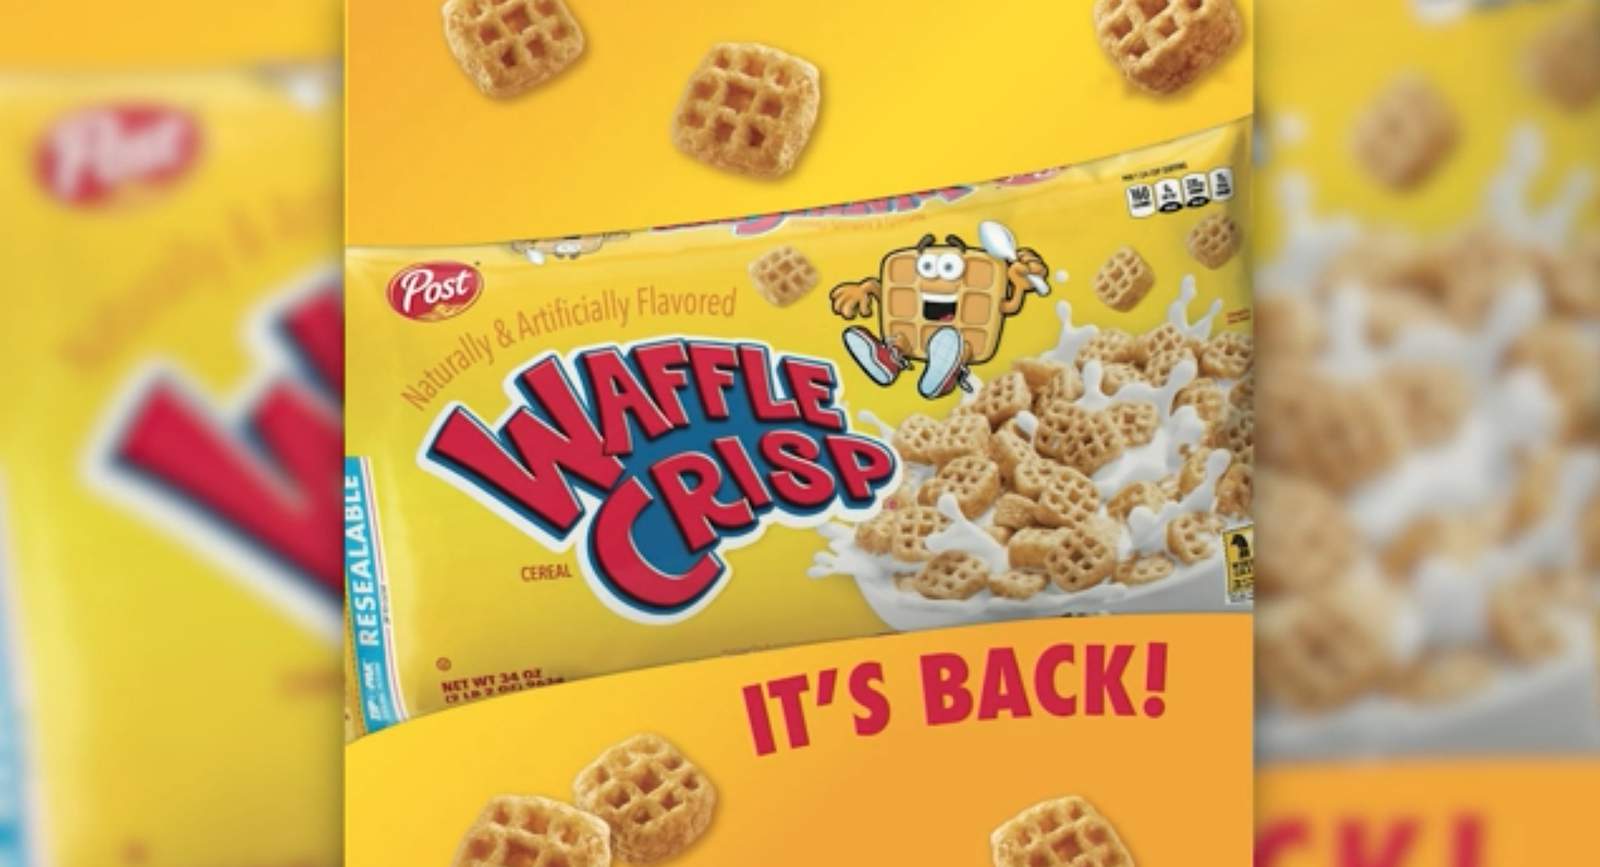 Post’s Waffle Crisp cereal back in stores